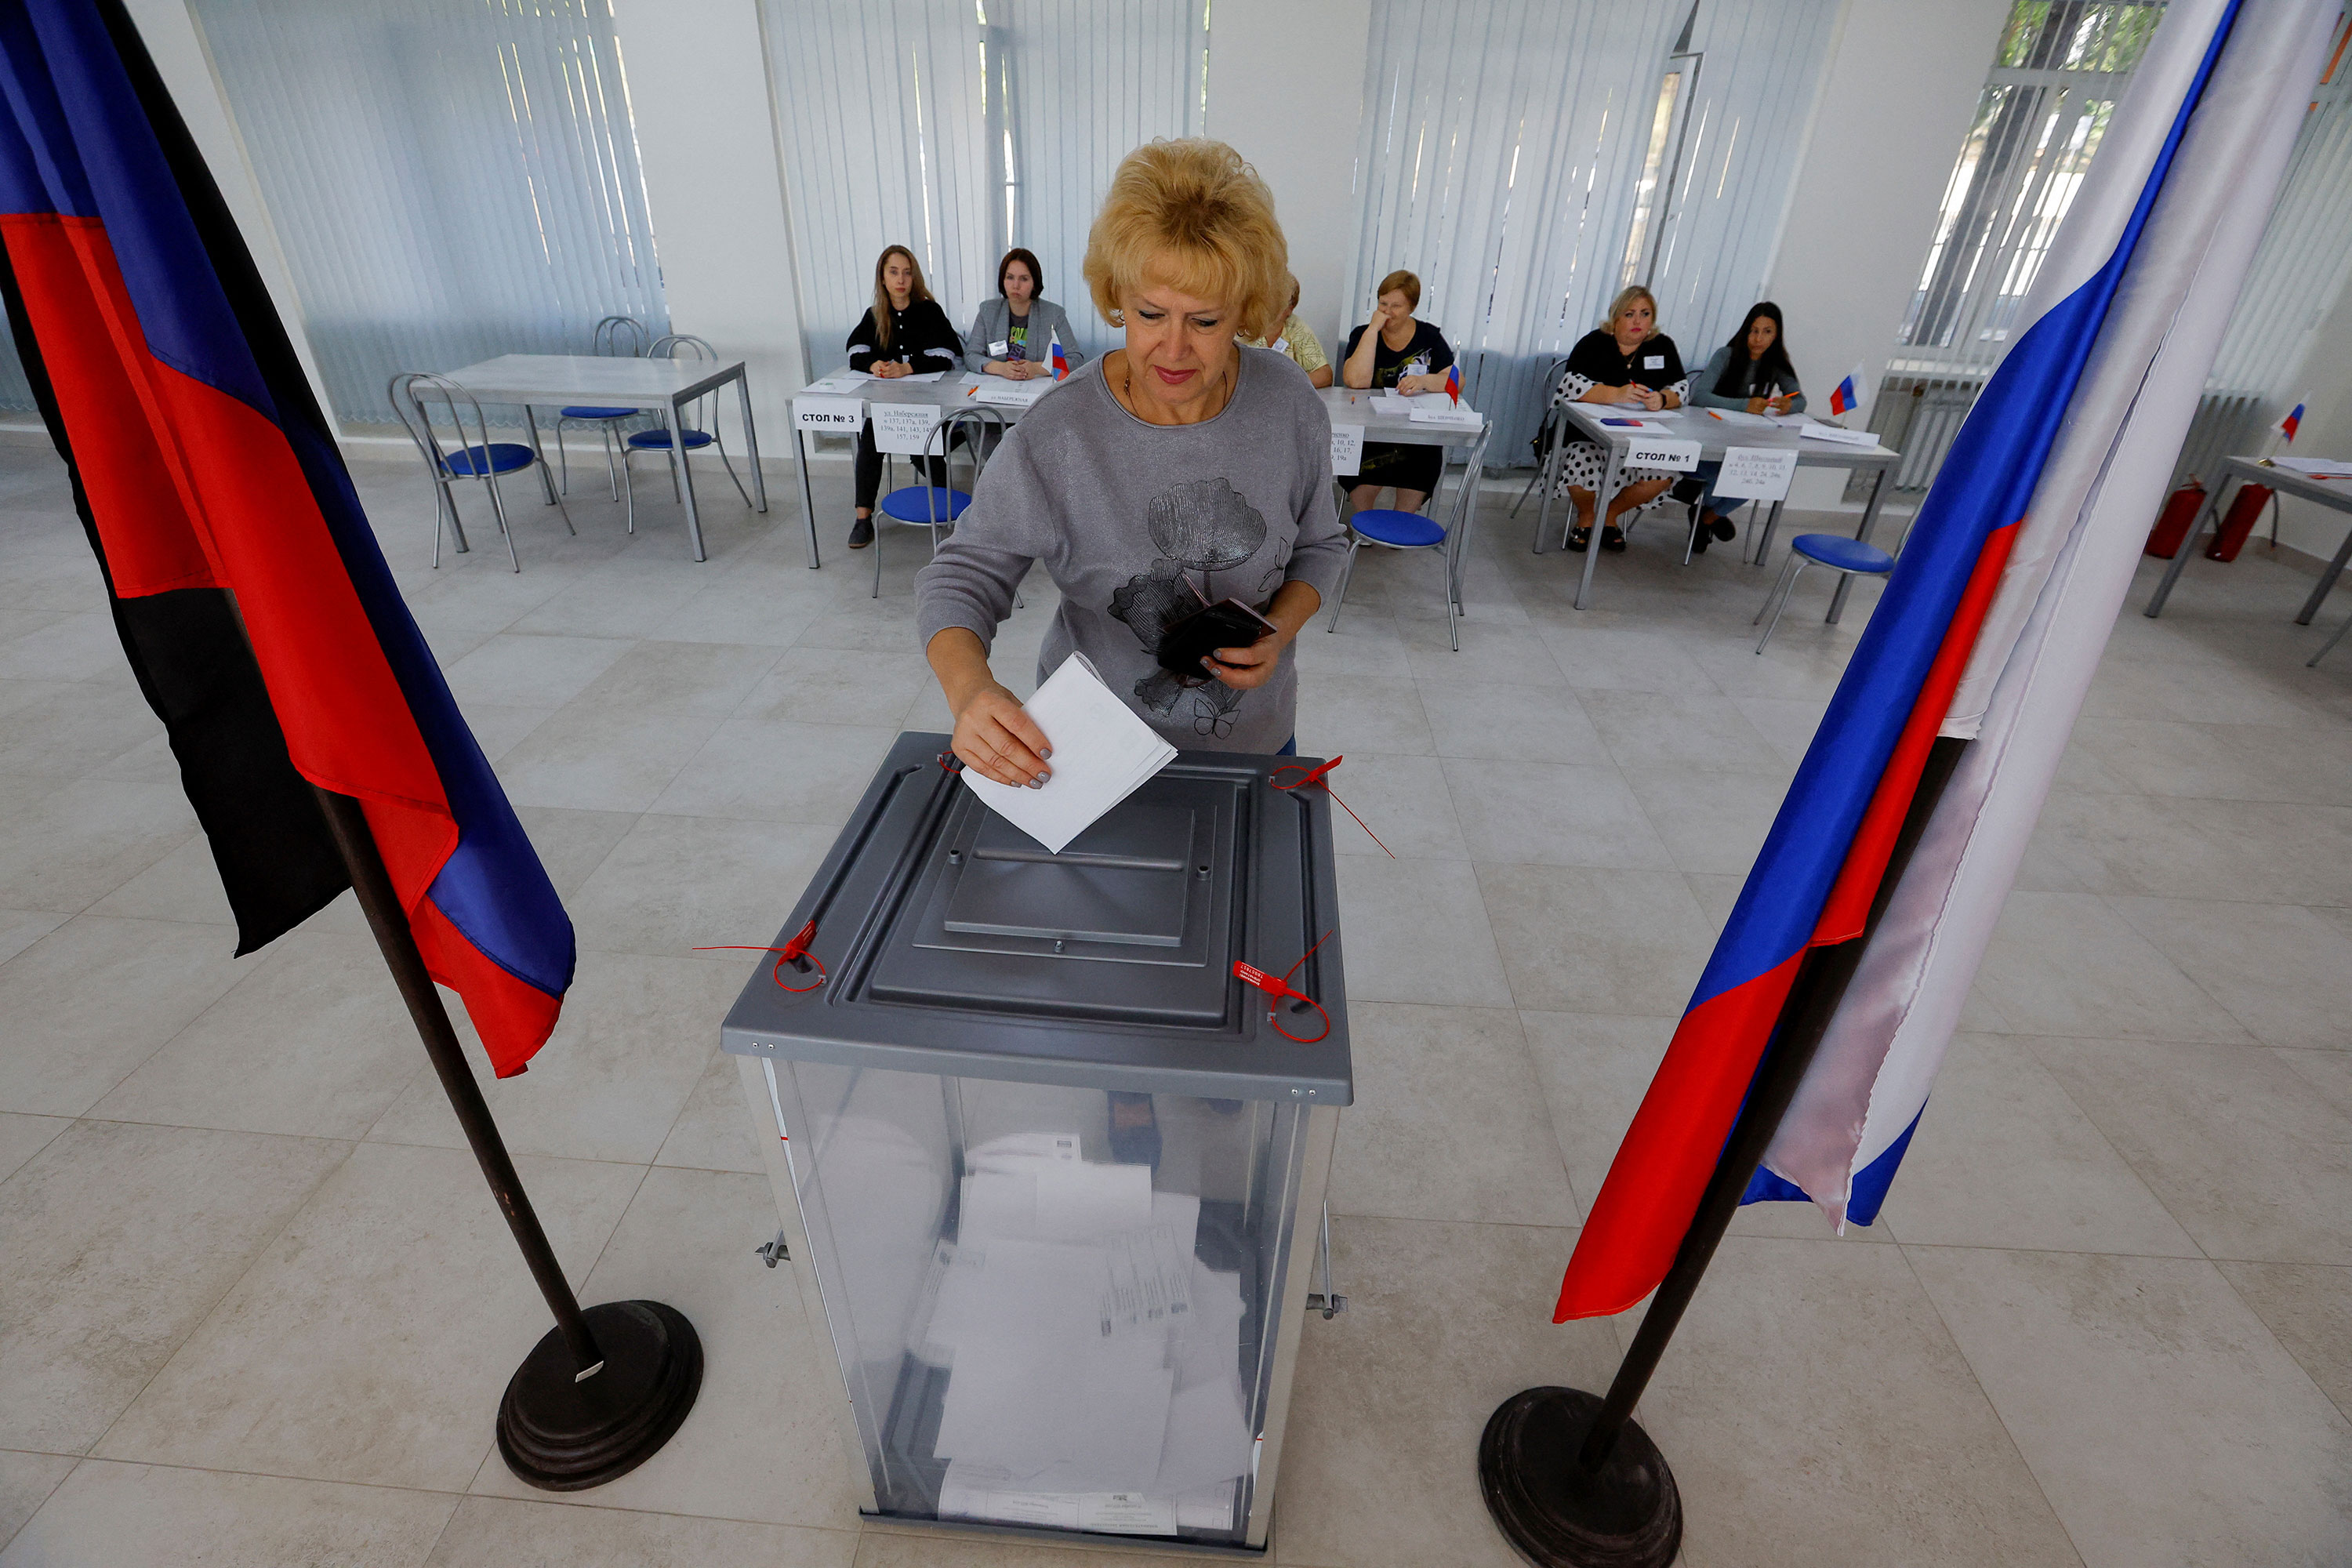 A voter casts a ballot at a polling station during local elections held by Russian-installed authorities in Donetsk, Russian-controlled Ukraine, on September 8. 